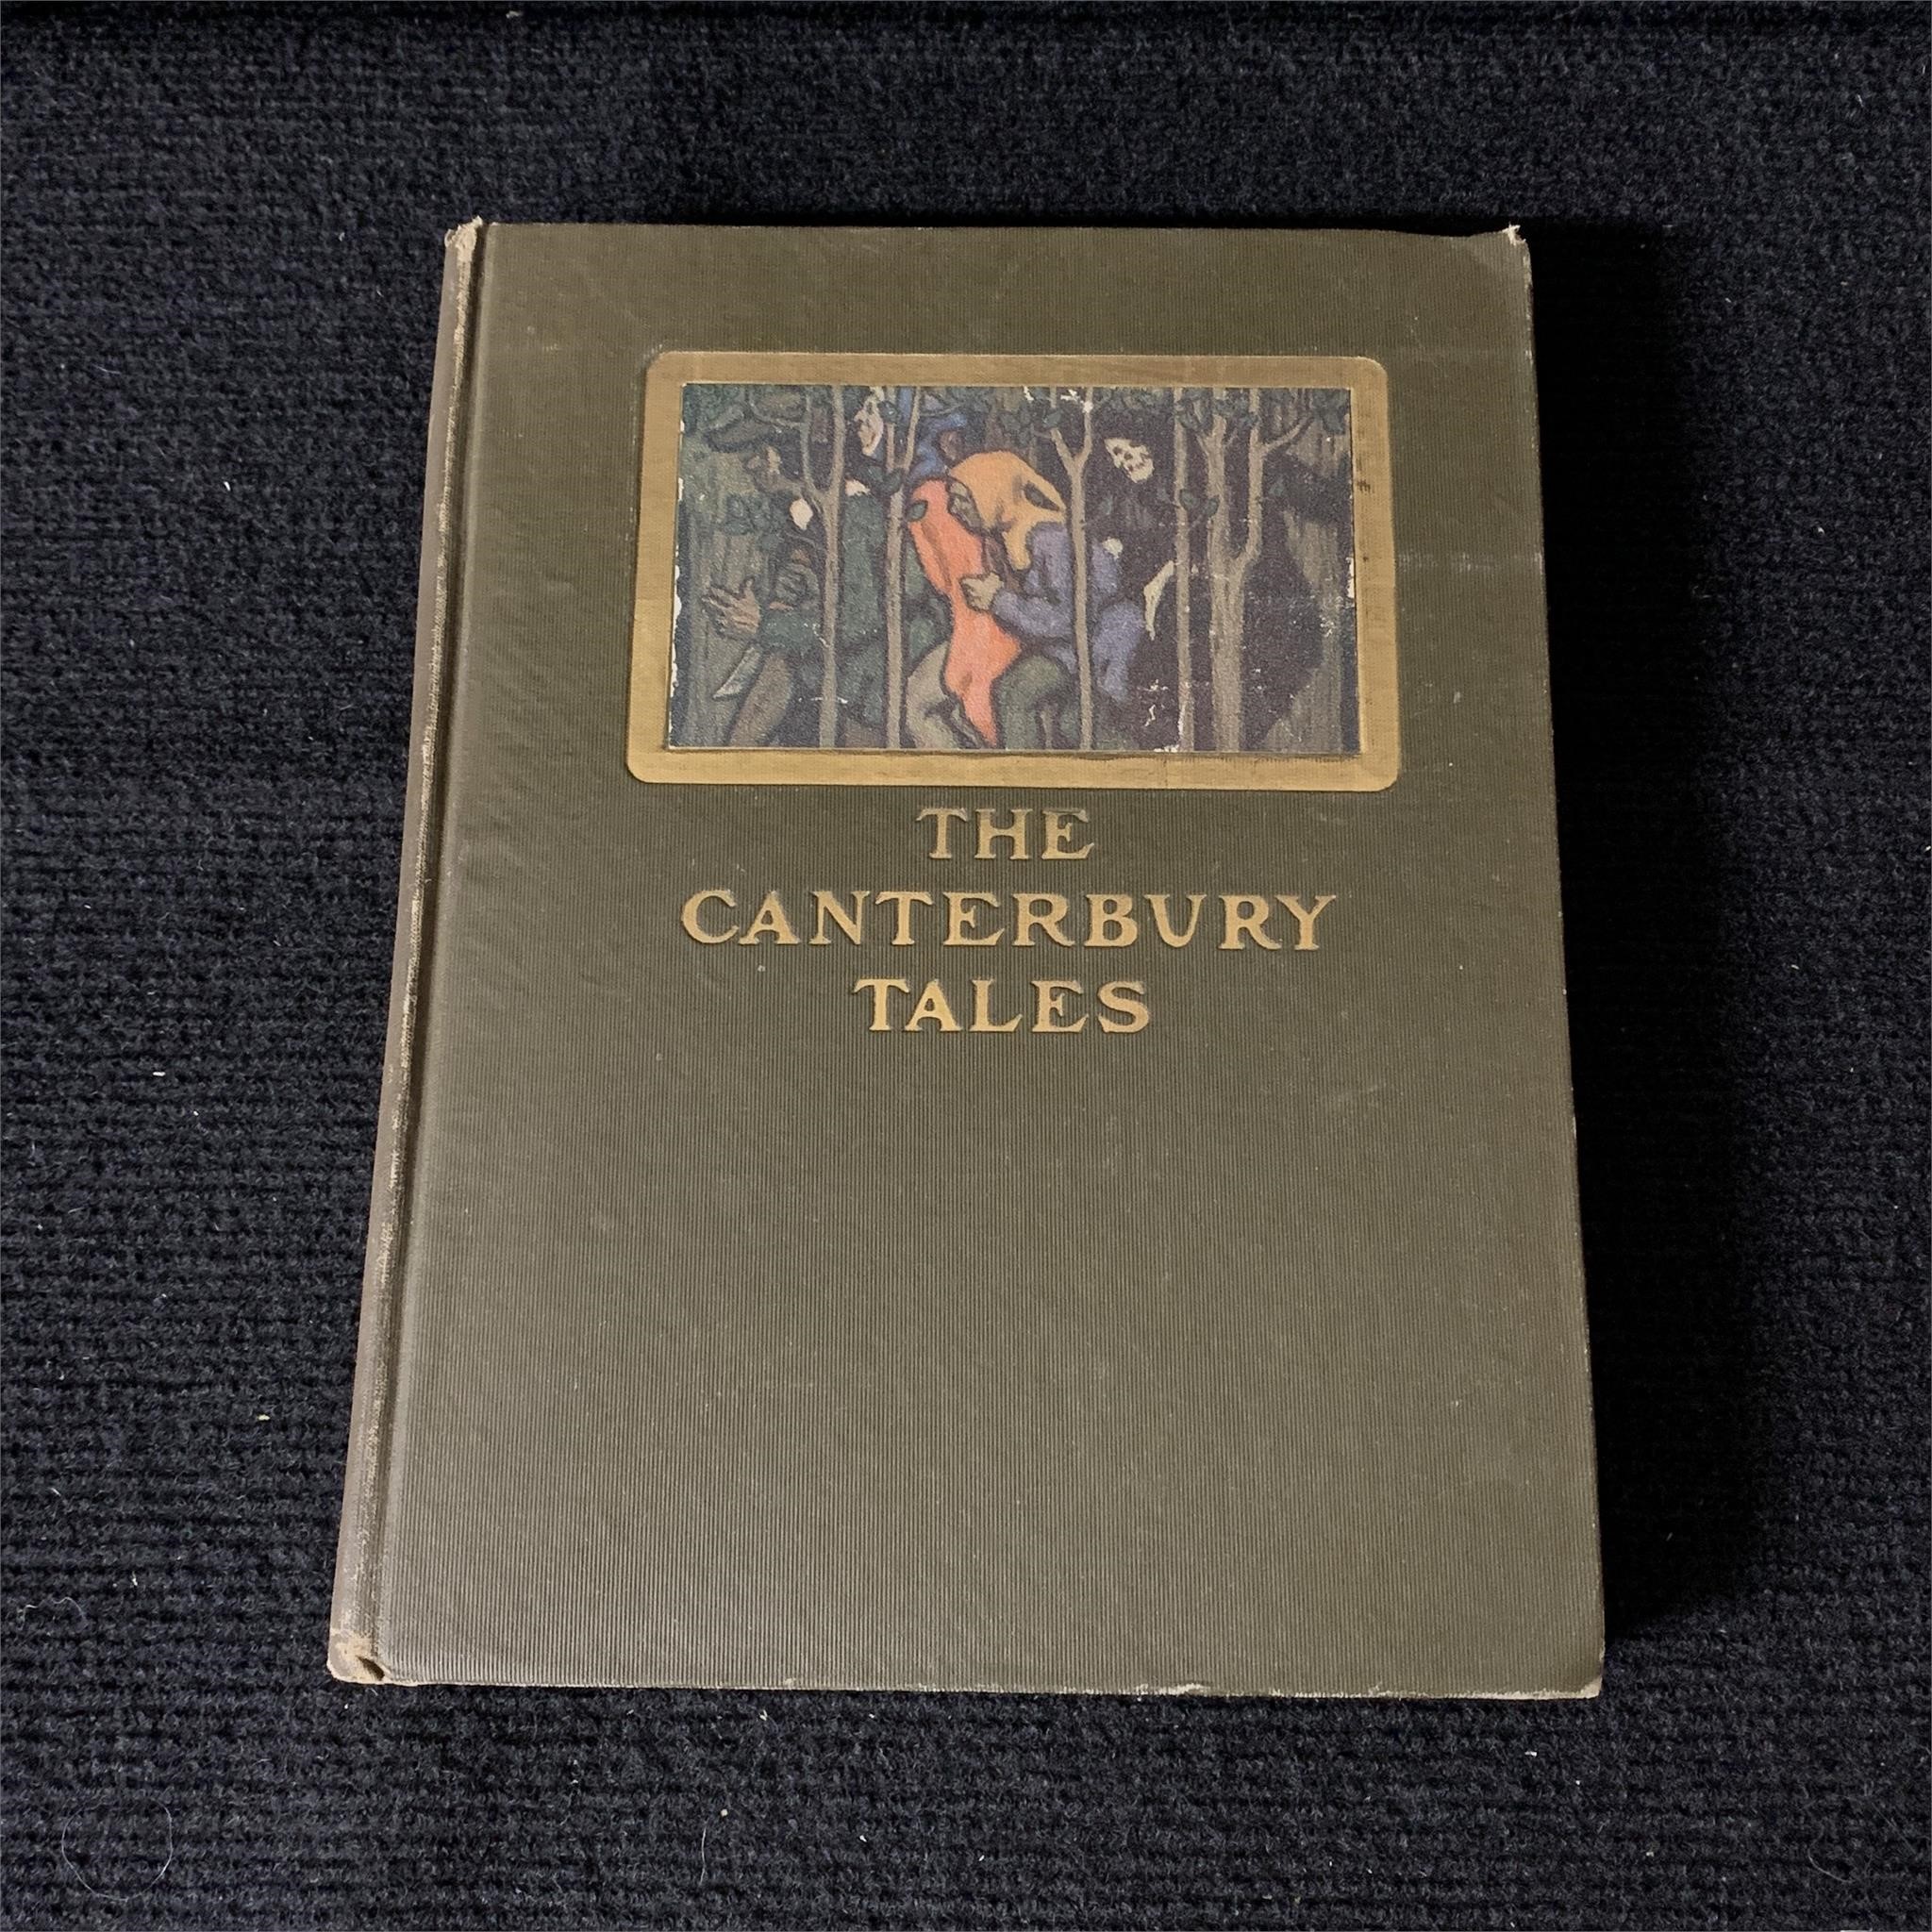 The Caterbury Tales, 1904 Copy